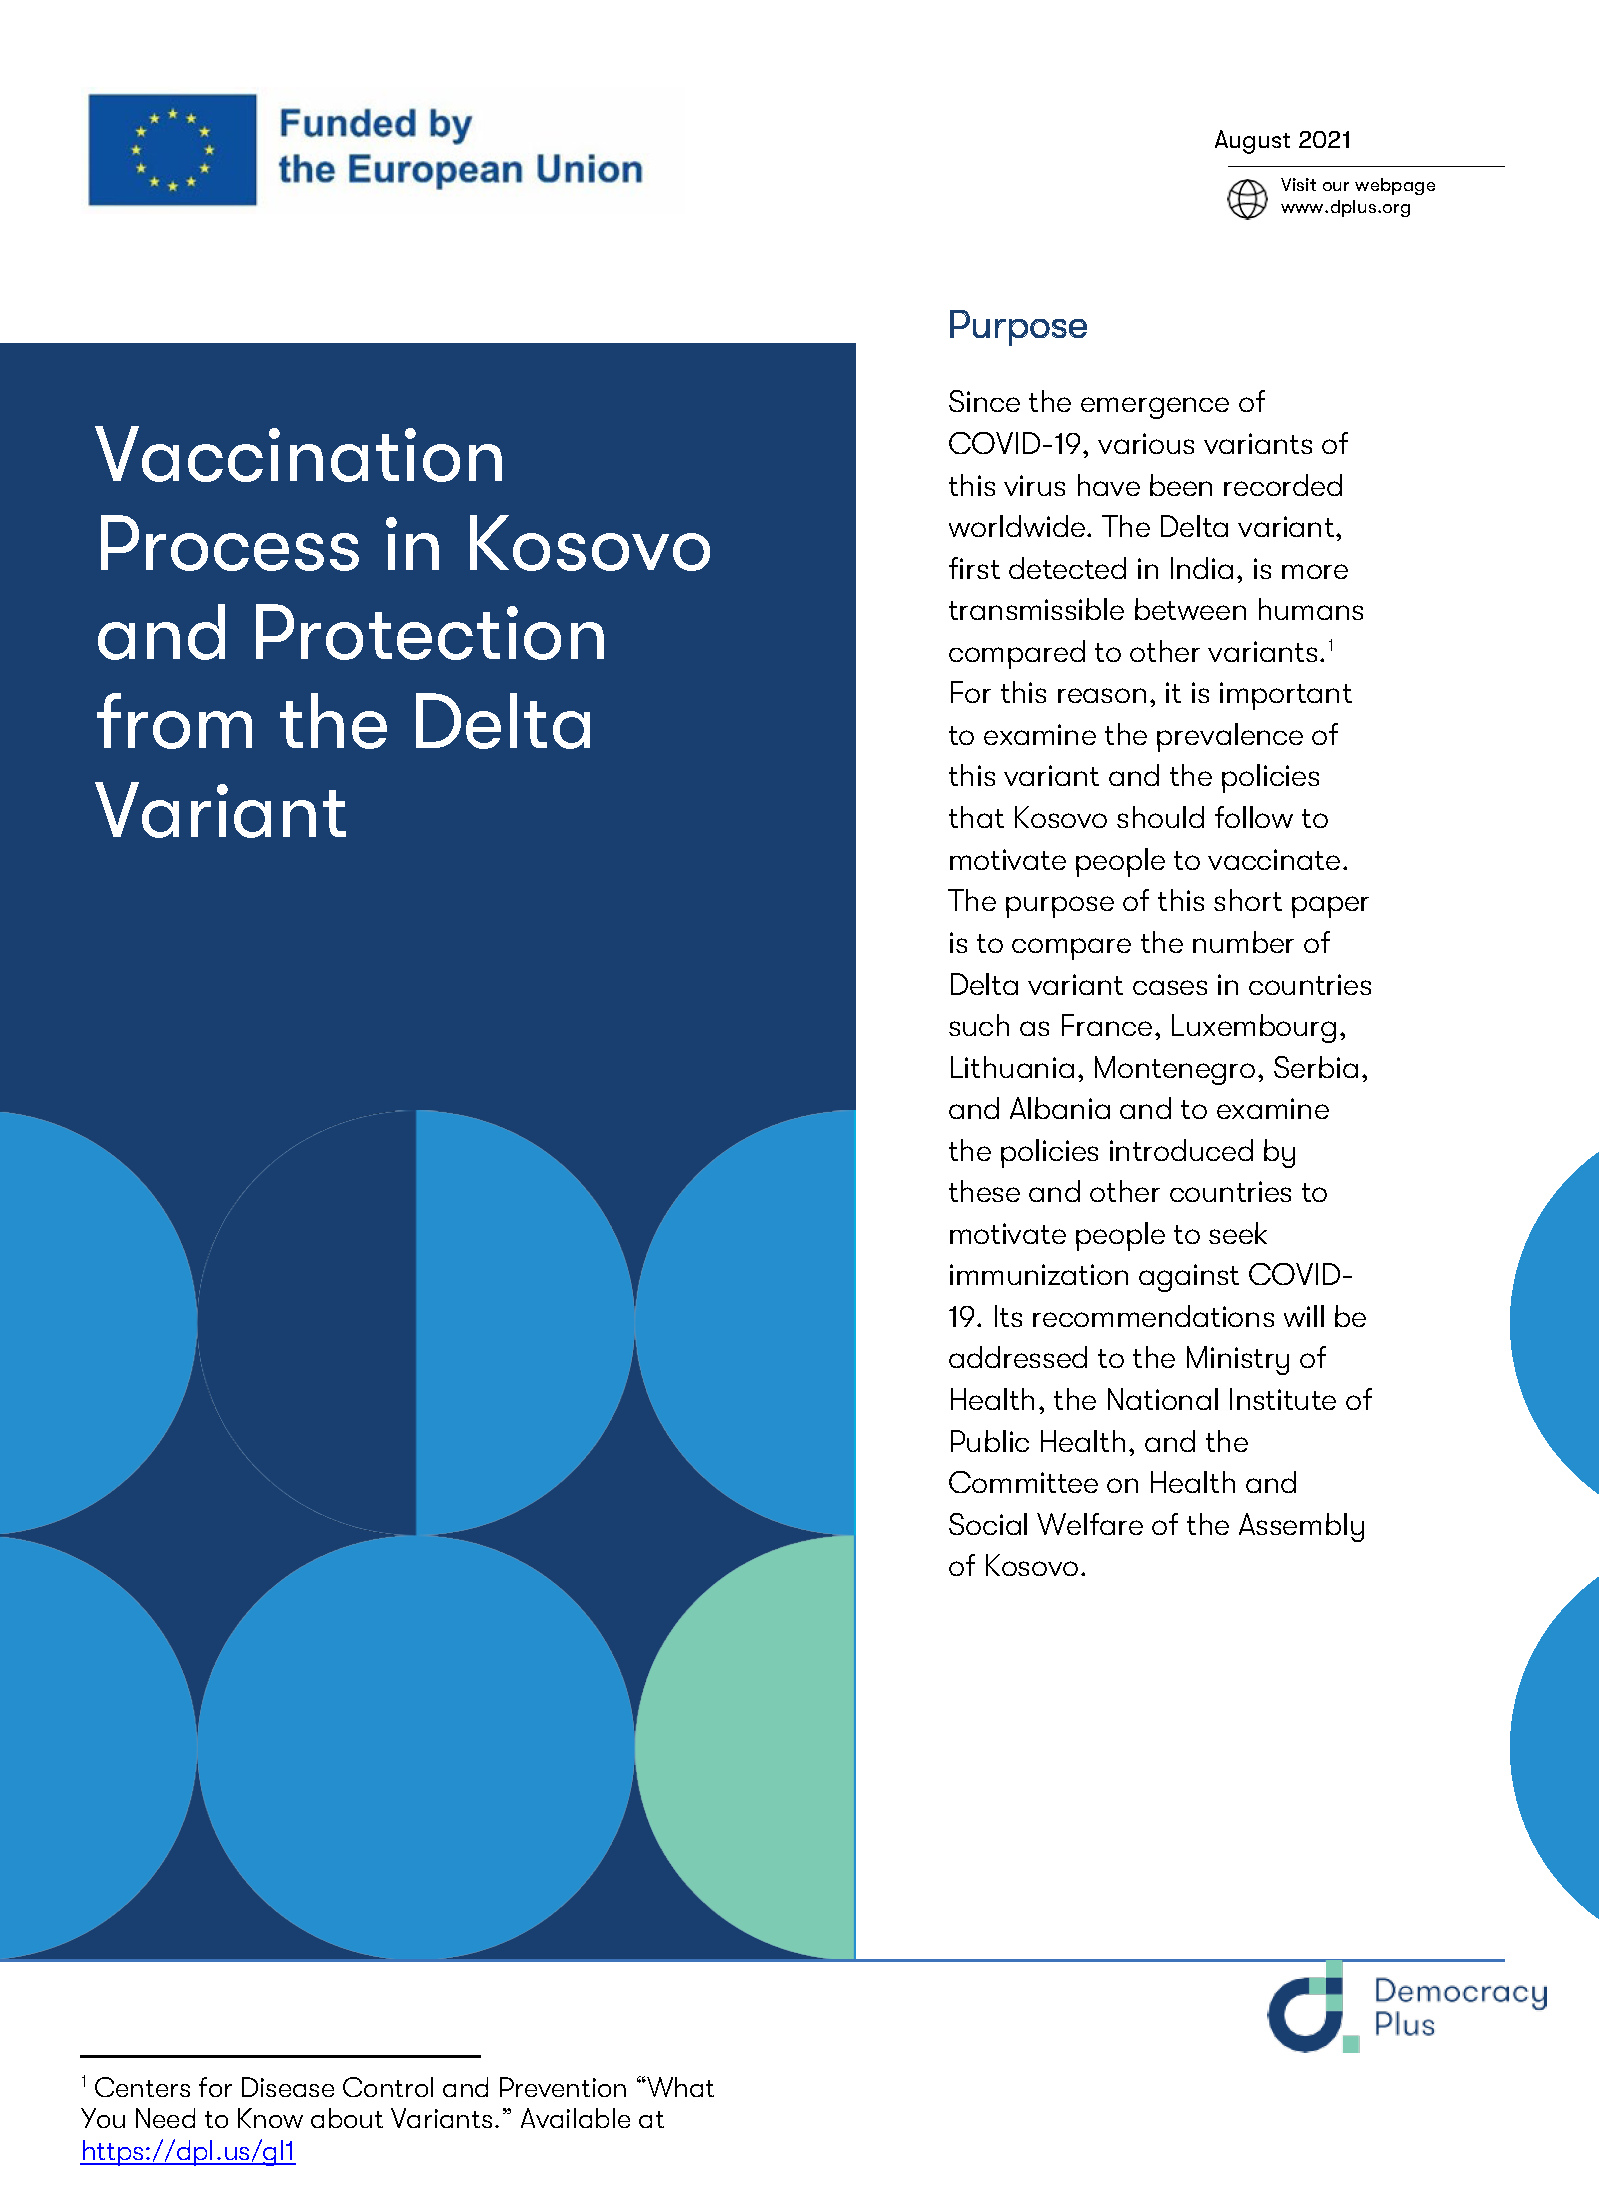 Vaccination Process in Kosovo and Protection from the Delta Variant